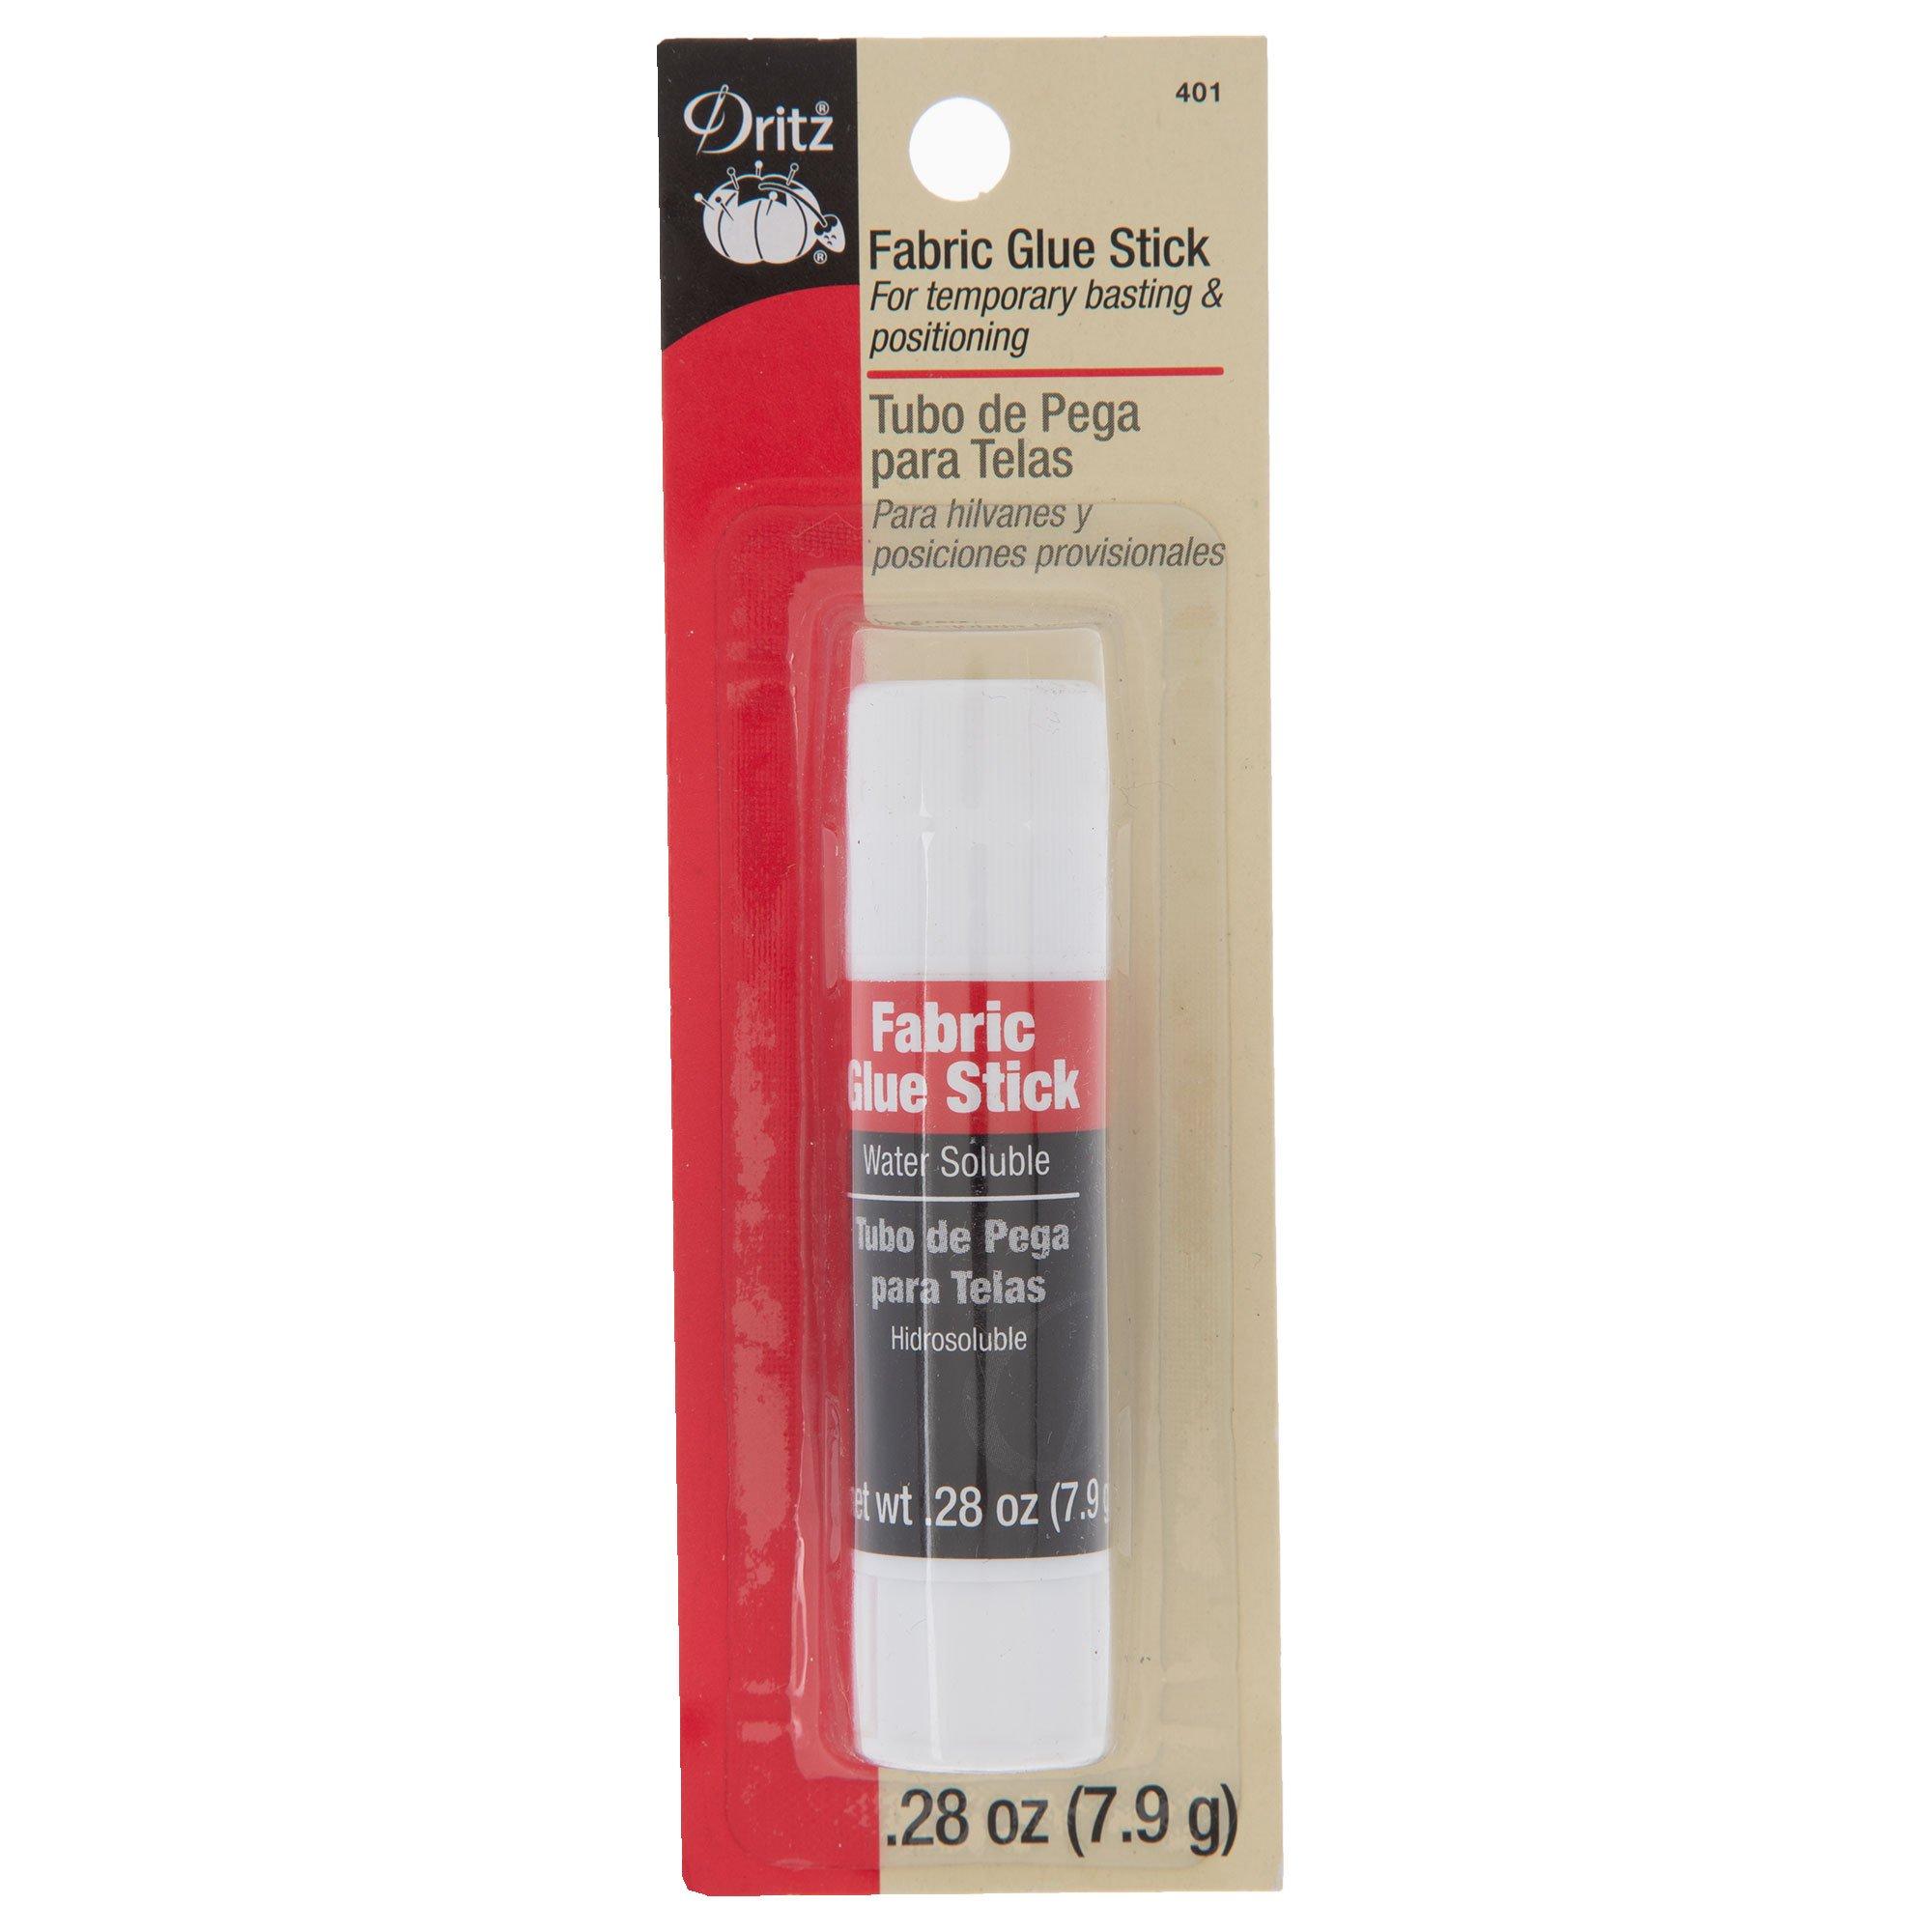 Collins fabric glue stick Basting adhesive, water soluble, acid